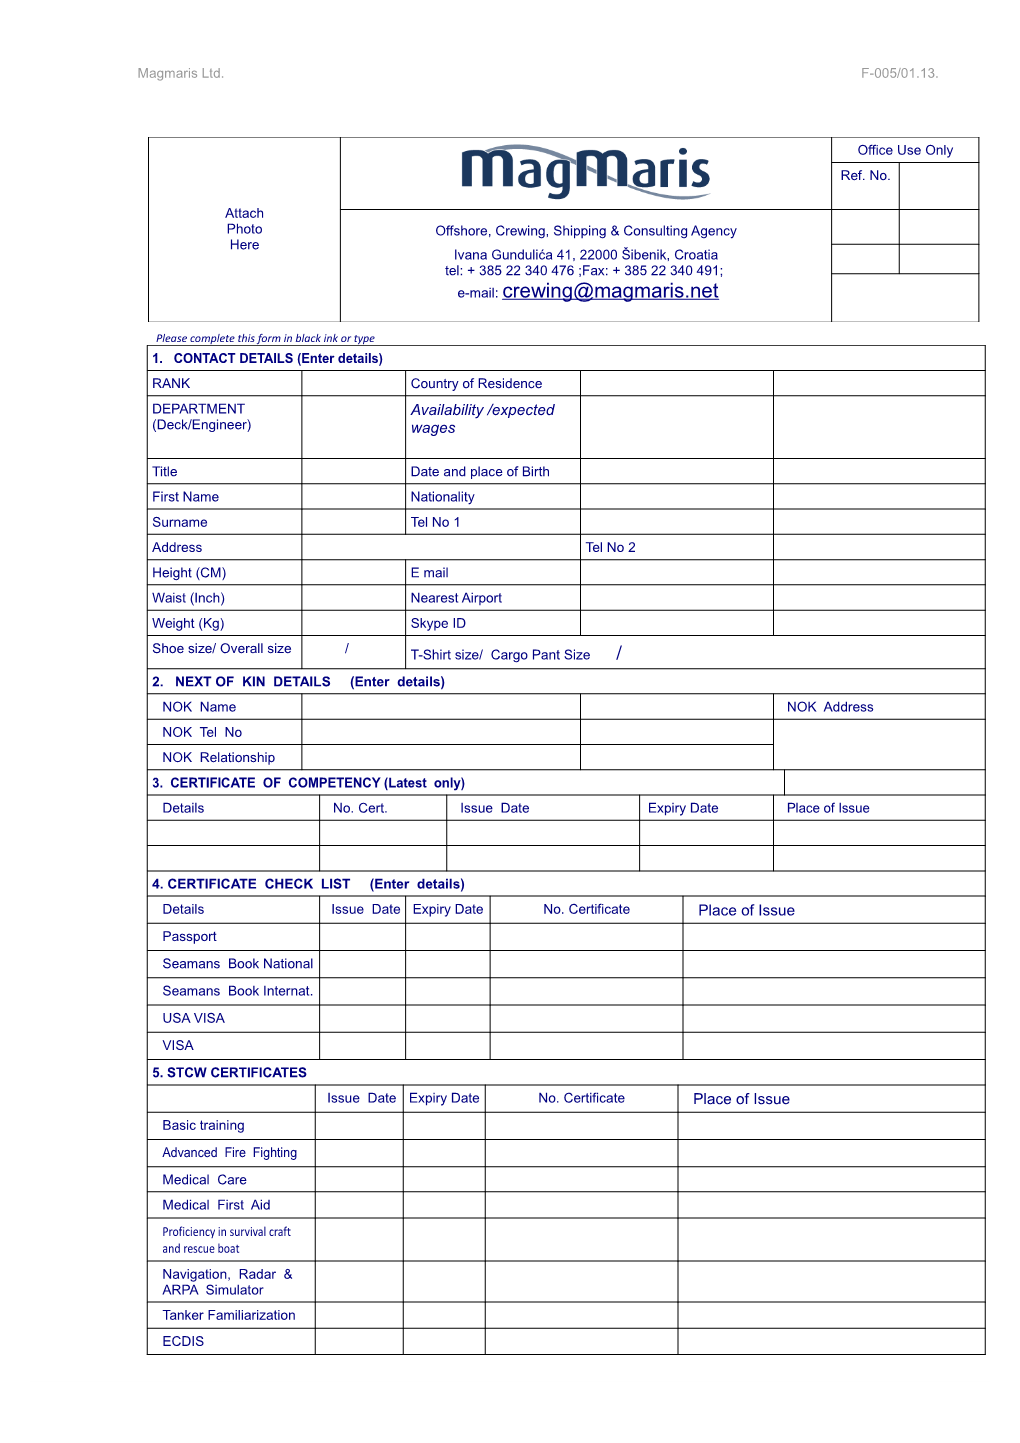 Please Complete This Form in Black Ink Or Type